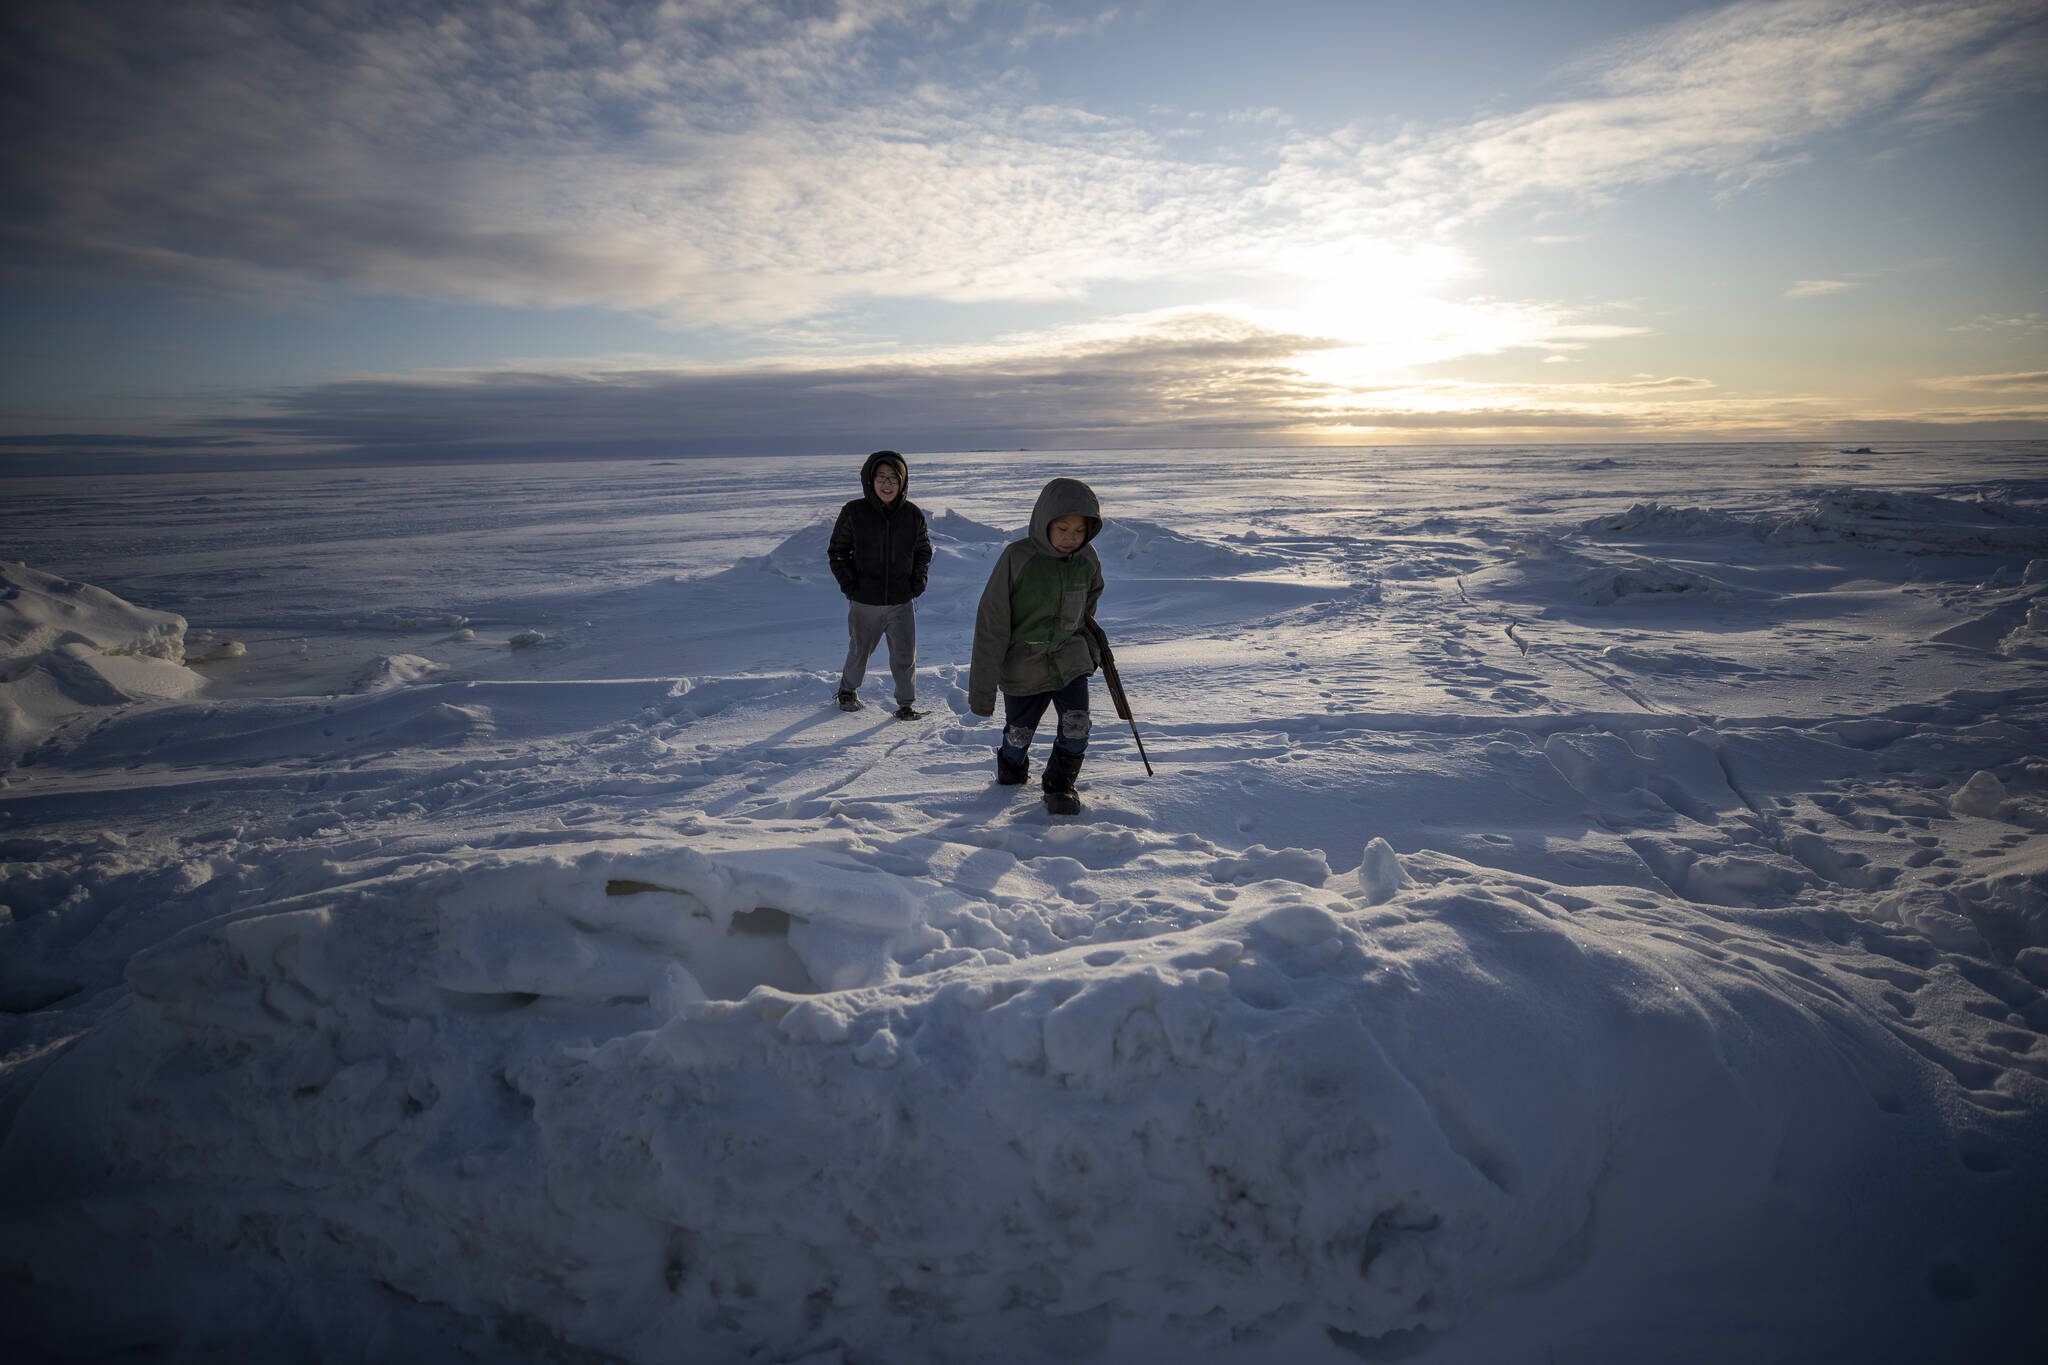 AP Photo/Gregory Bull,File
In this Saturday, Jan. 18, 2020, photo, George Chakuchin, left, and Mick Chakuchin look out over the Bering Sea near Toksook Bay, Alaska. A federal grant will allow an extensive trail system to connect all four communities on Nelson Island, just off Alaska’s western coast. The $12 million grant will pay to take the trail the last link, from Toksook Bay, which received the federal money, to the community of Mertarvik, the new site for the village of Newtok. The village is moving because of erosion.